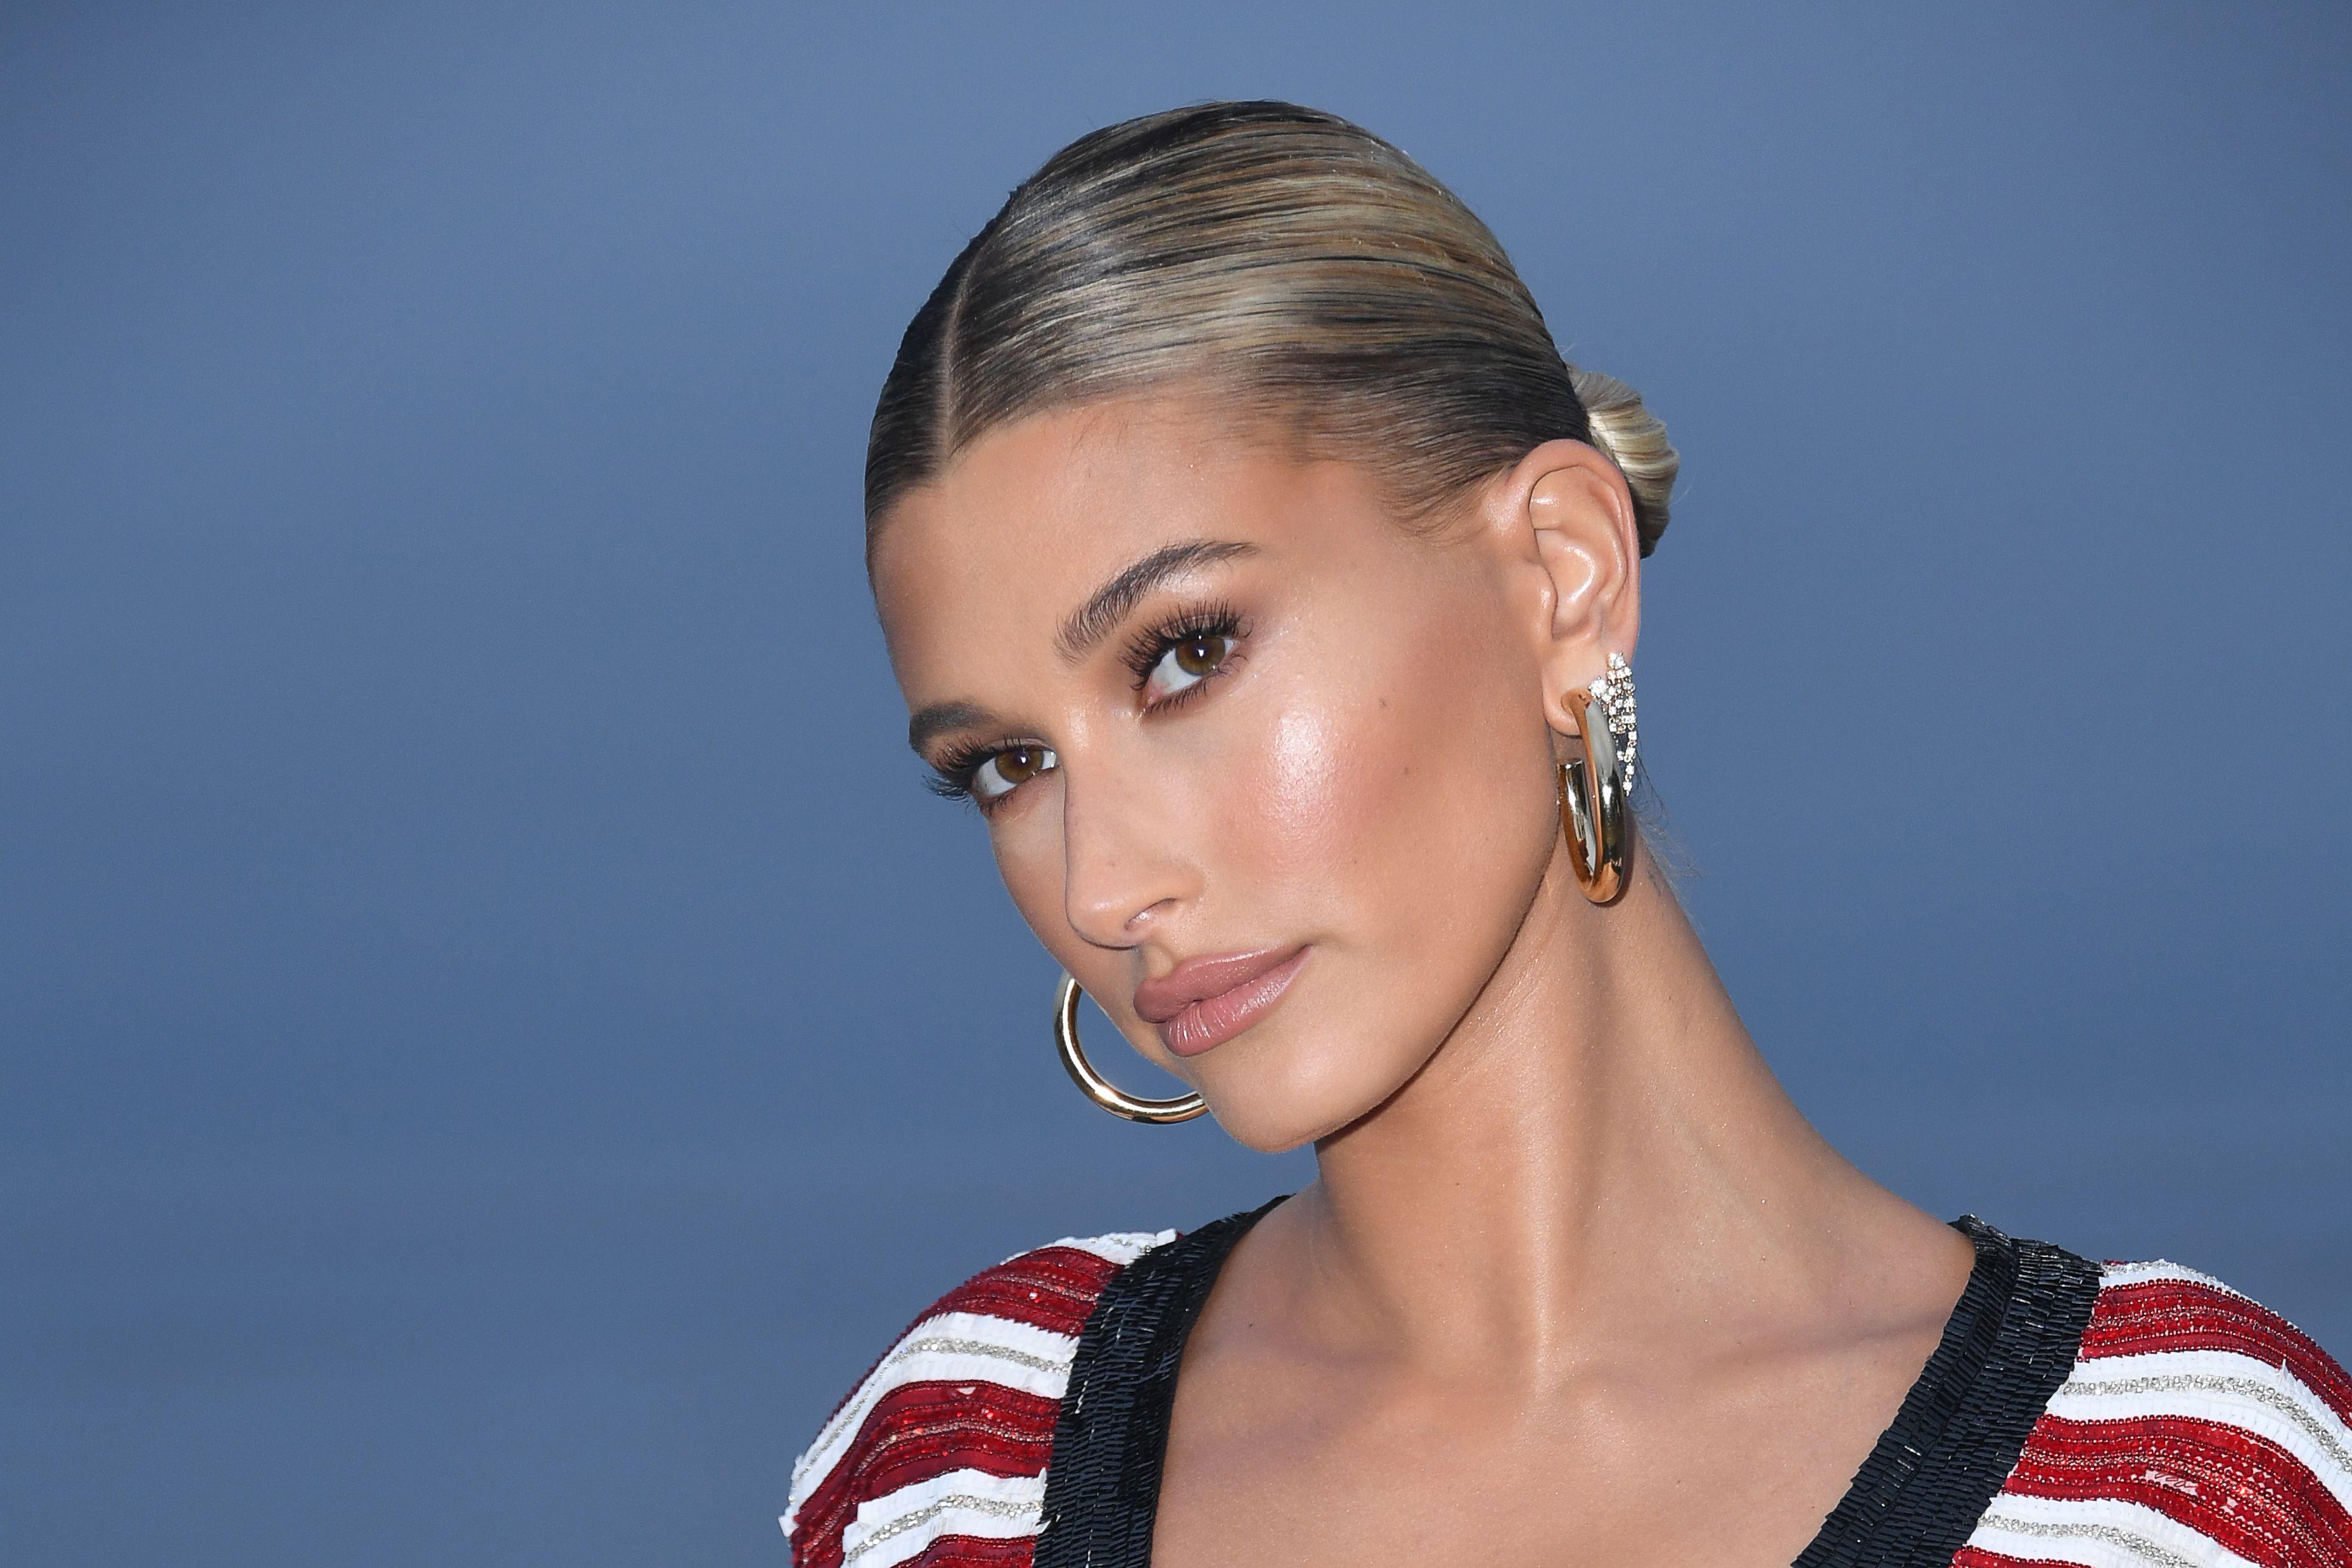 Hailey Baldwin Responds To Fans Comments On The Medical Condition Of Her Pinky Fingers The Blast